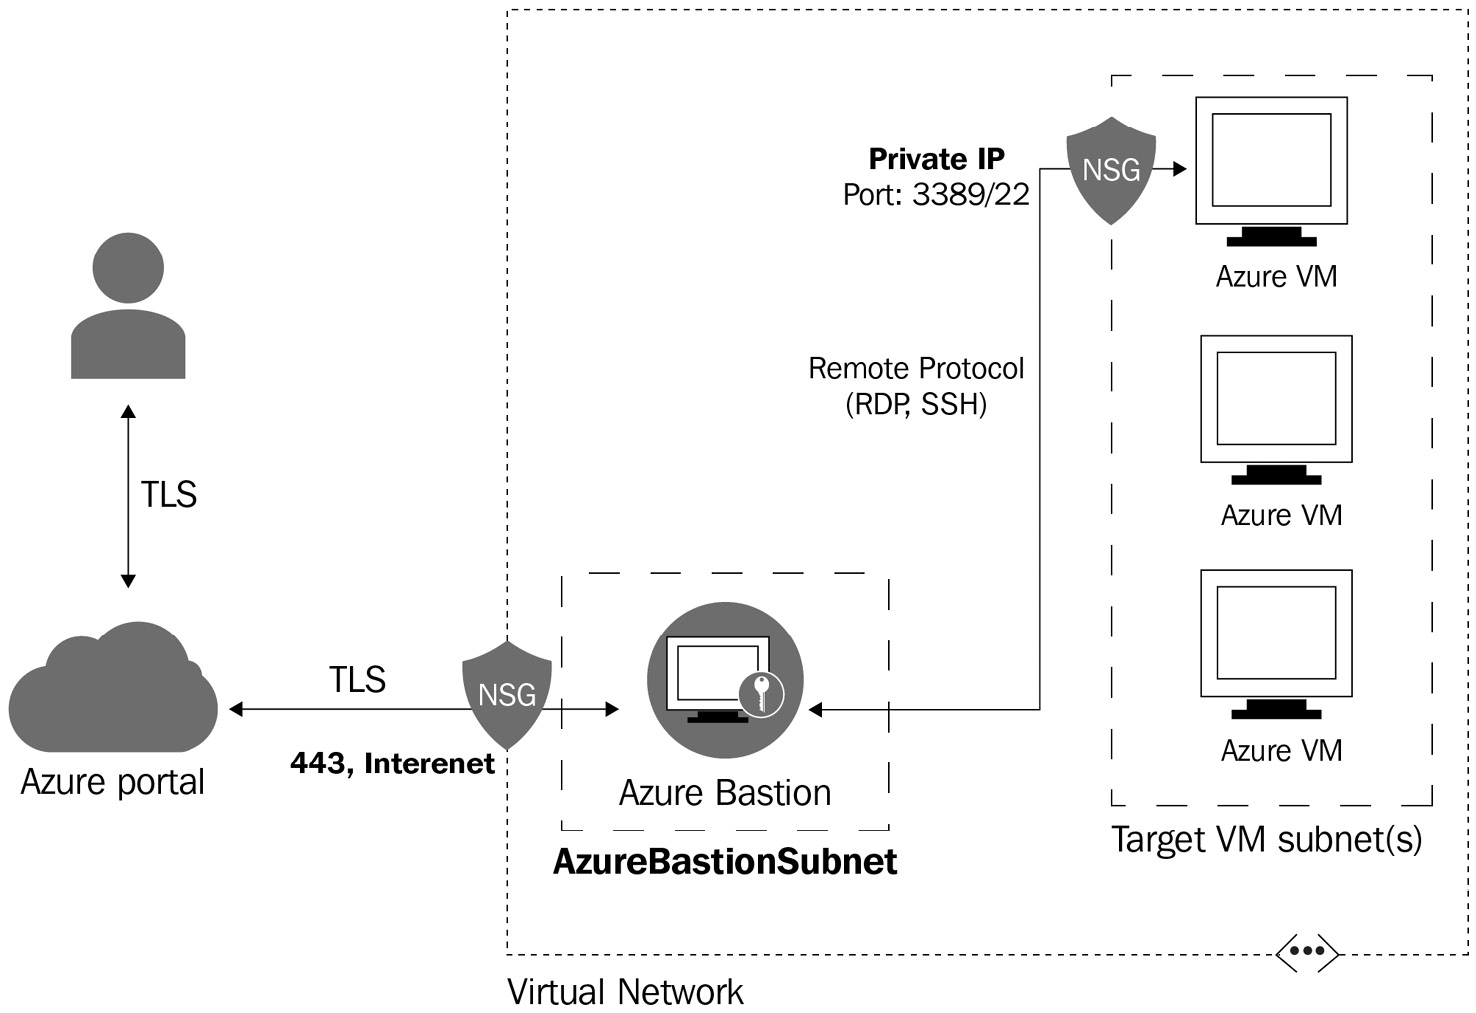 Figure 4.11 – Diagram showing the communication followed for Azure Bastion